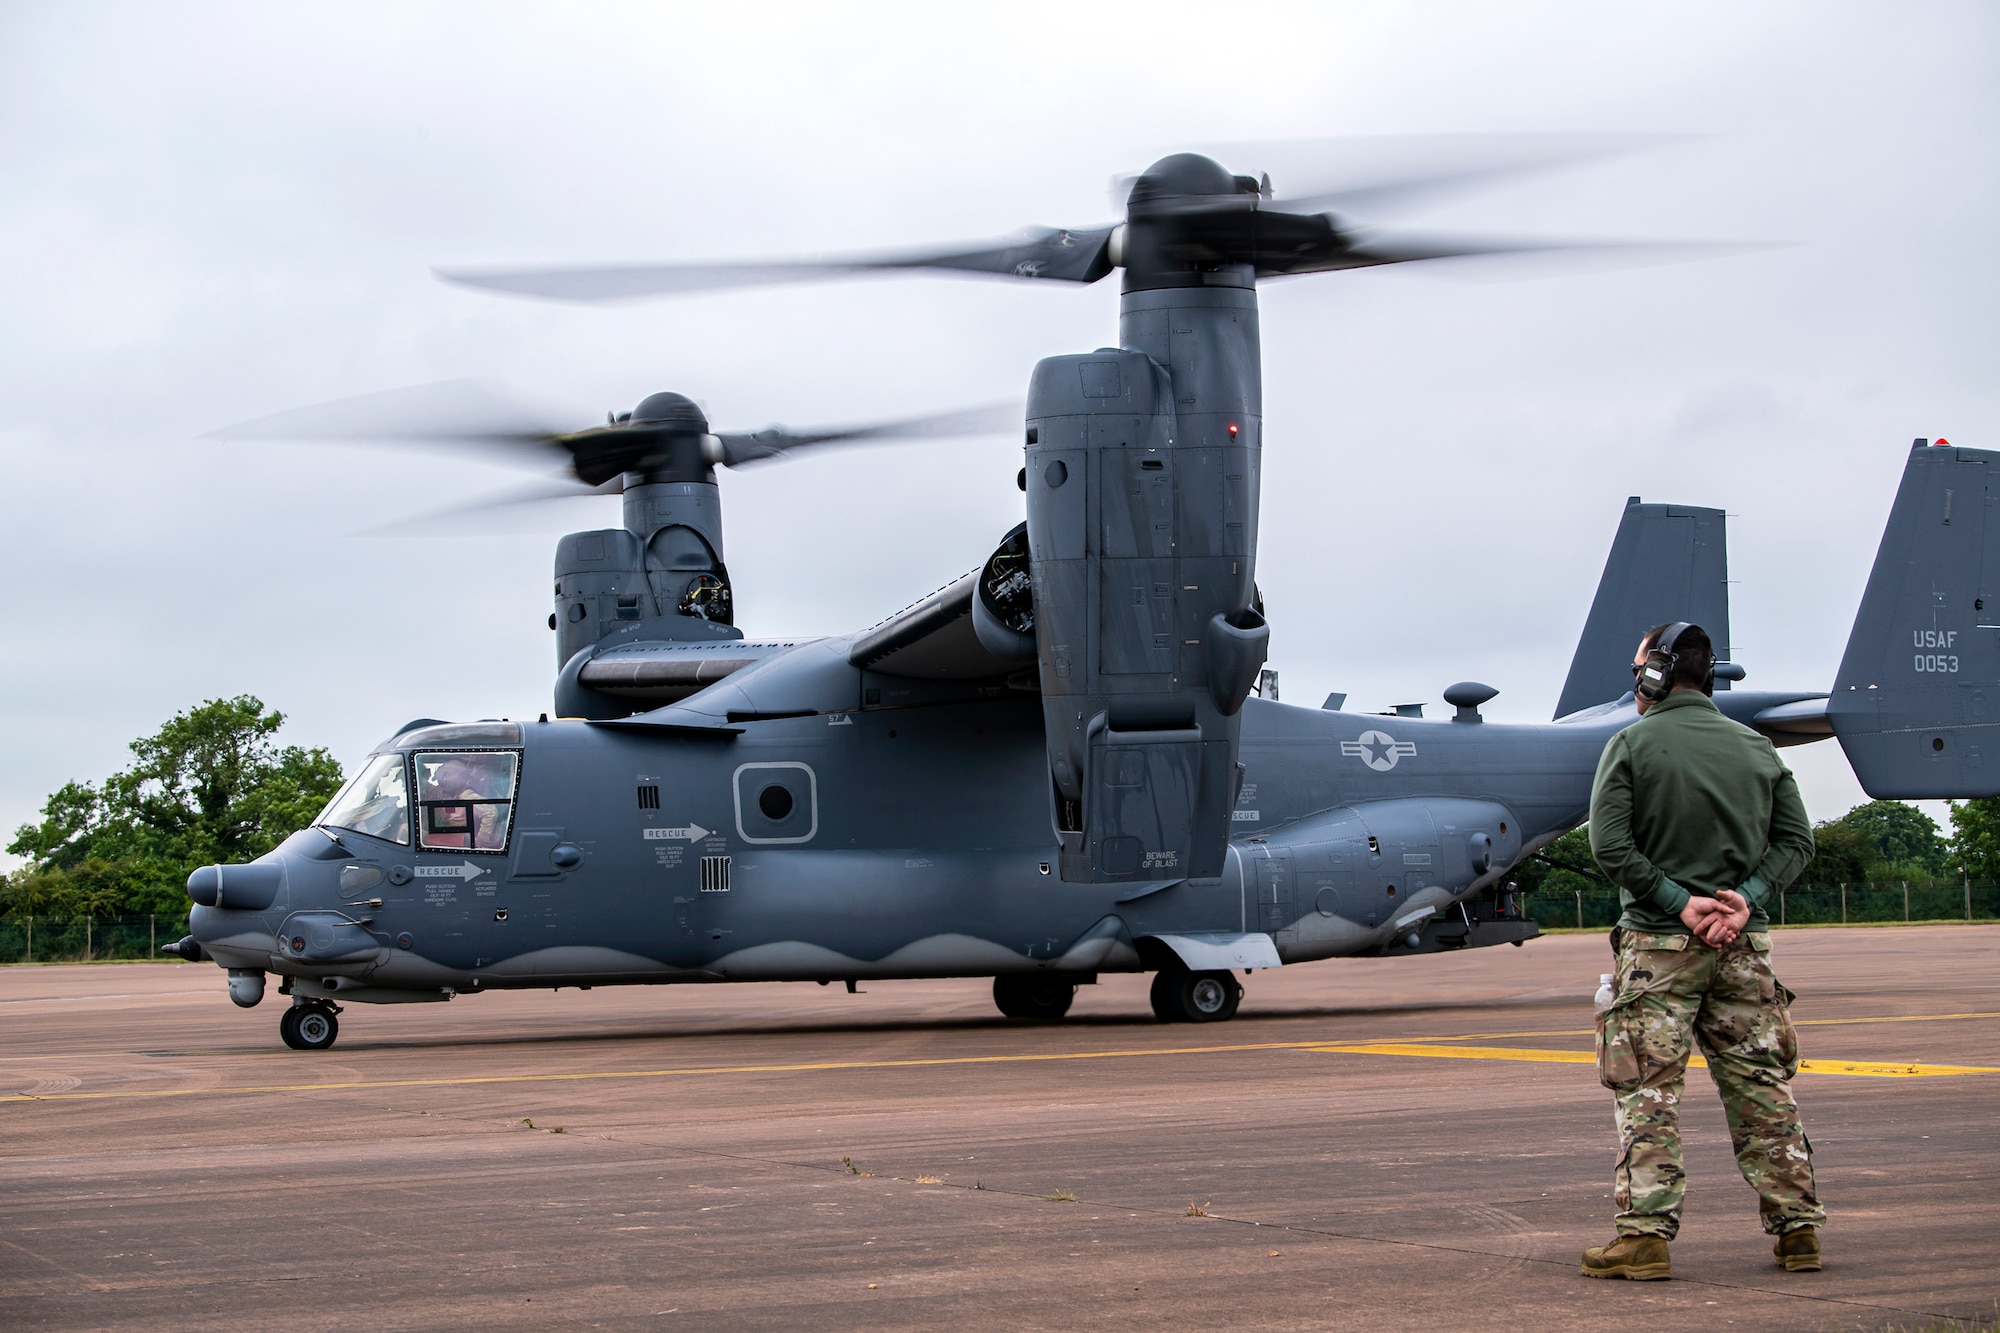 A CV-22A Osprey assigned to the 352d Special Operations Wing prepares to take off during an Agile Combat Employment exercise at RAF Fairford, England, Sept. 13, 2021. Airmen from the 501st Combat Support Wing, 100th Air Refueling Wing and 352d SOW partnered to conduct an ACE exercise to test their overall readiness and lethality capabilities. The exercise enables U.S. forces in Europe to operate from locations with varying levels of capacity and support. (U.S. Air Force photo by Senior Airman Eugene Oliver)